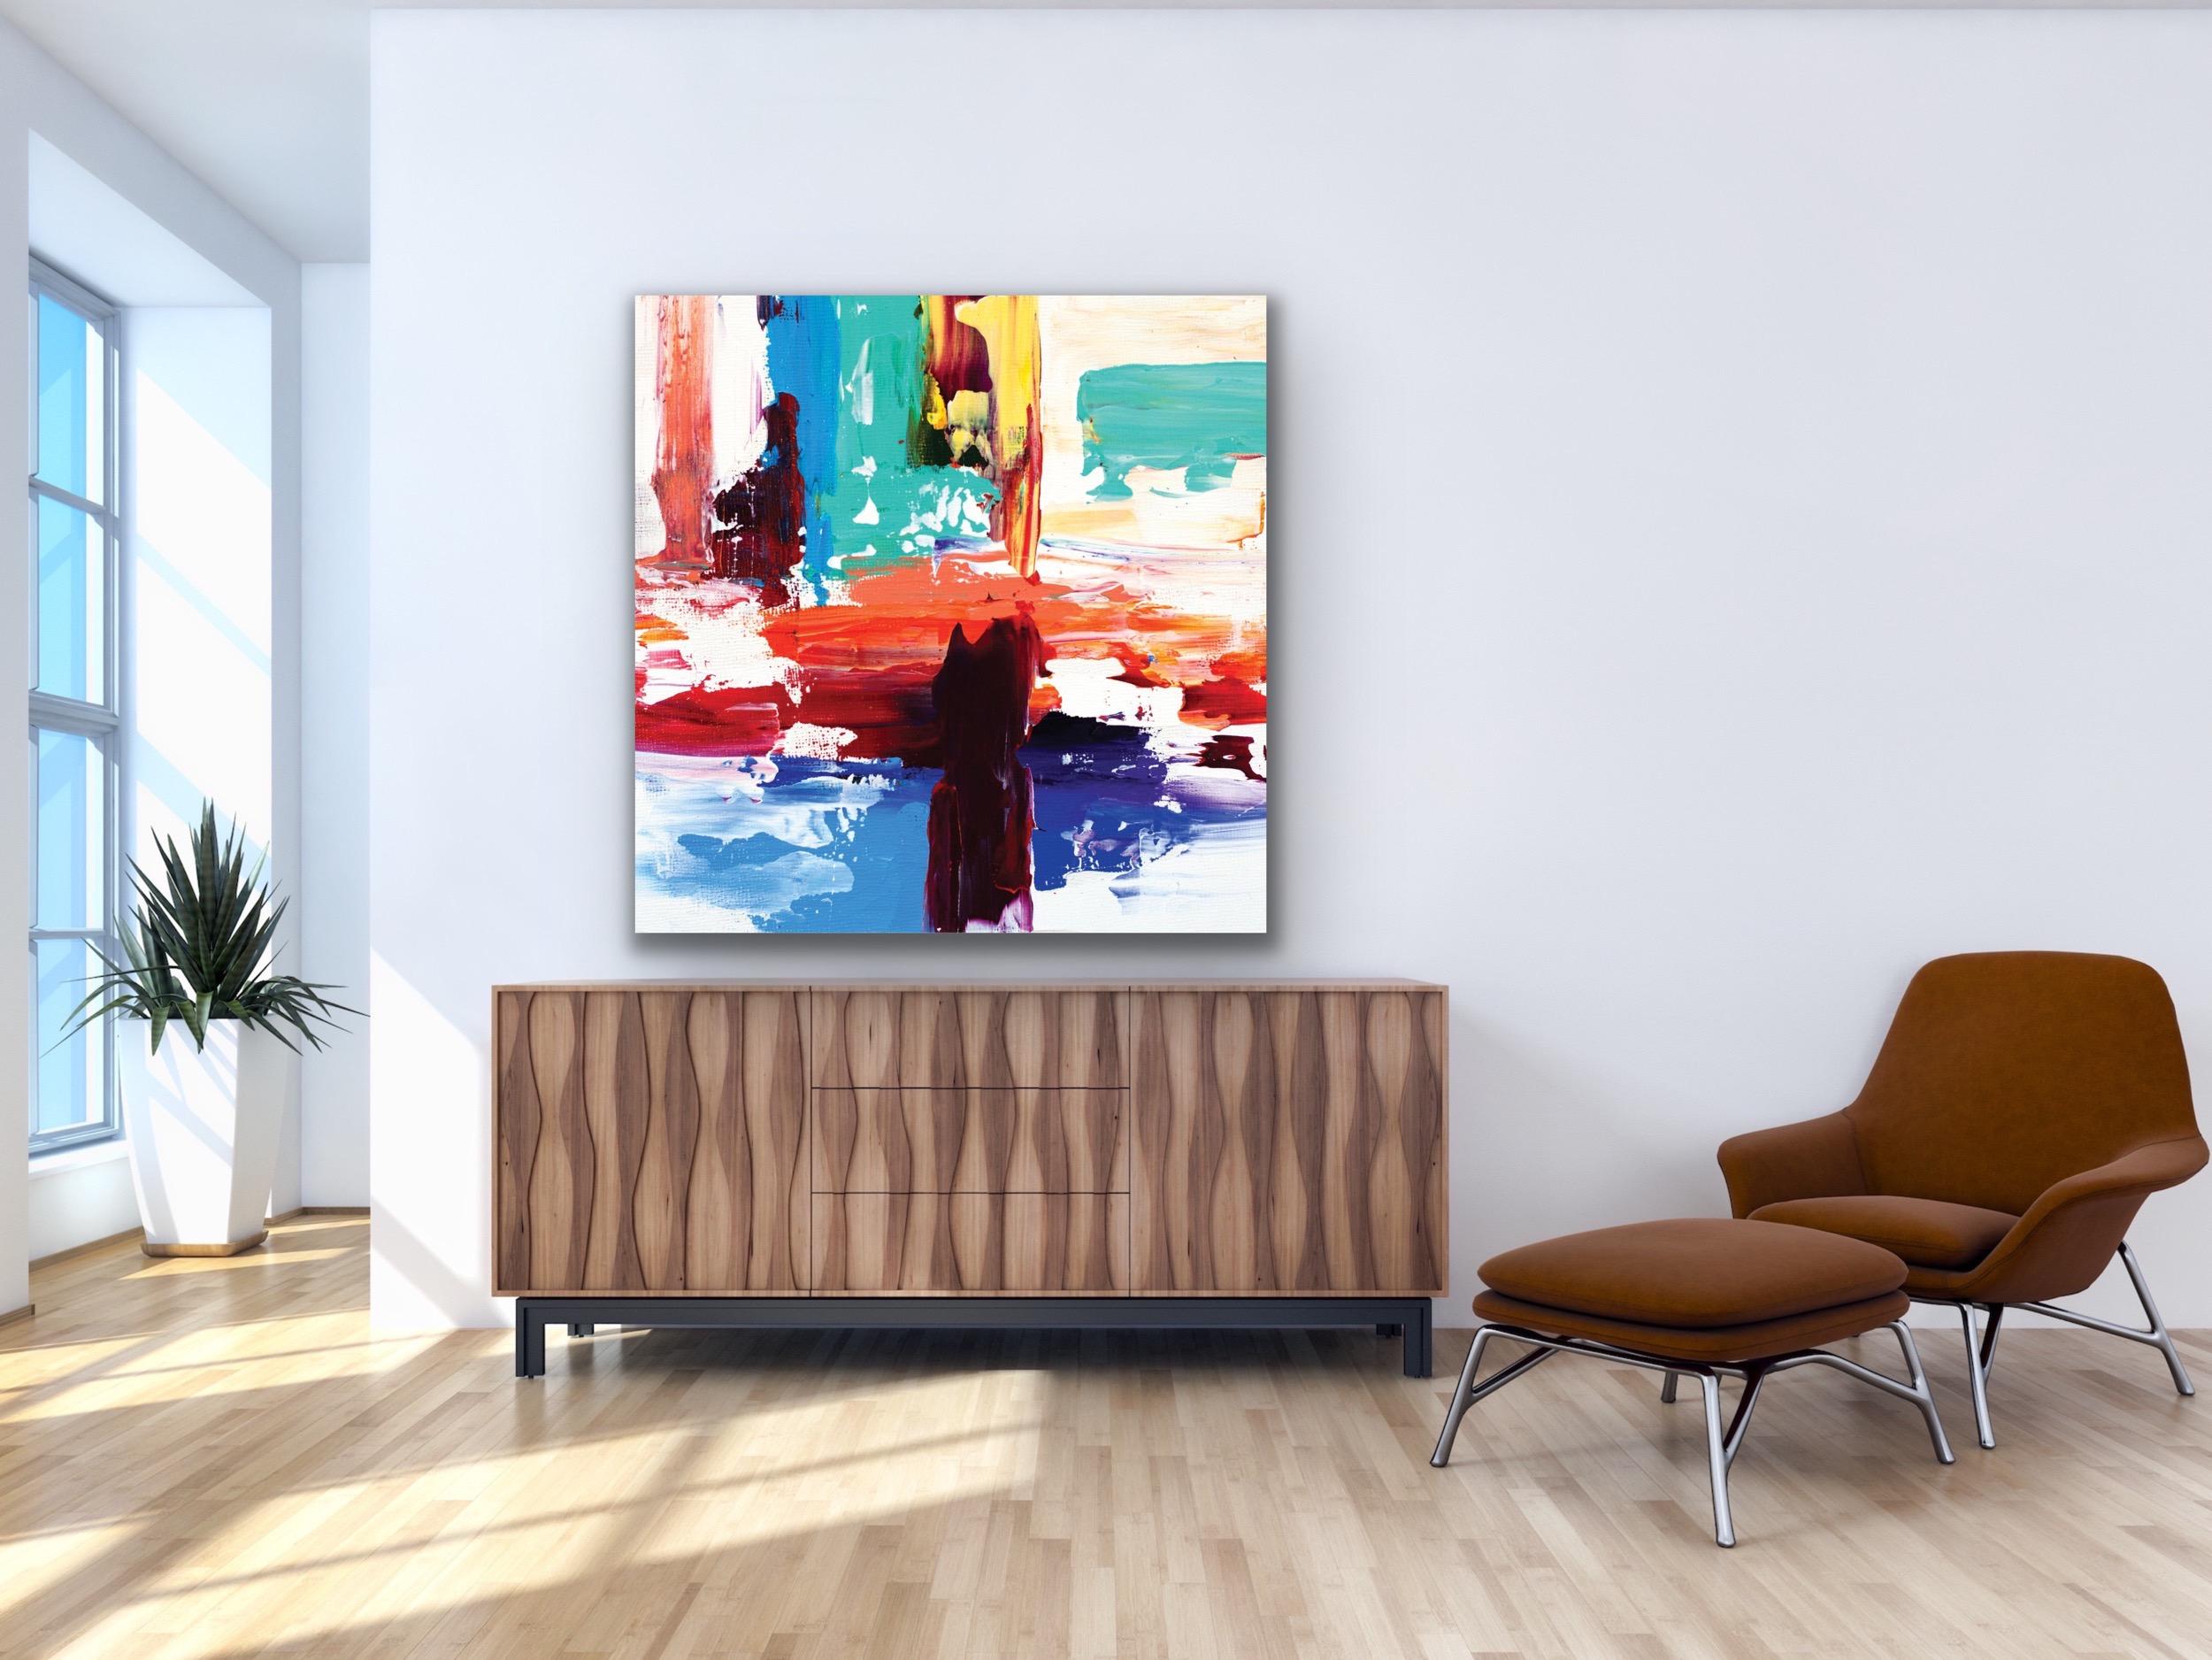 Contemporary Painting, Modern Decor, Large Indoor Outdoor Giclee Print on Metal 2